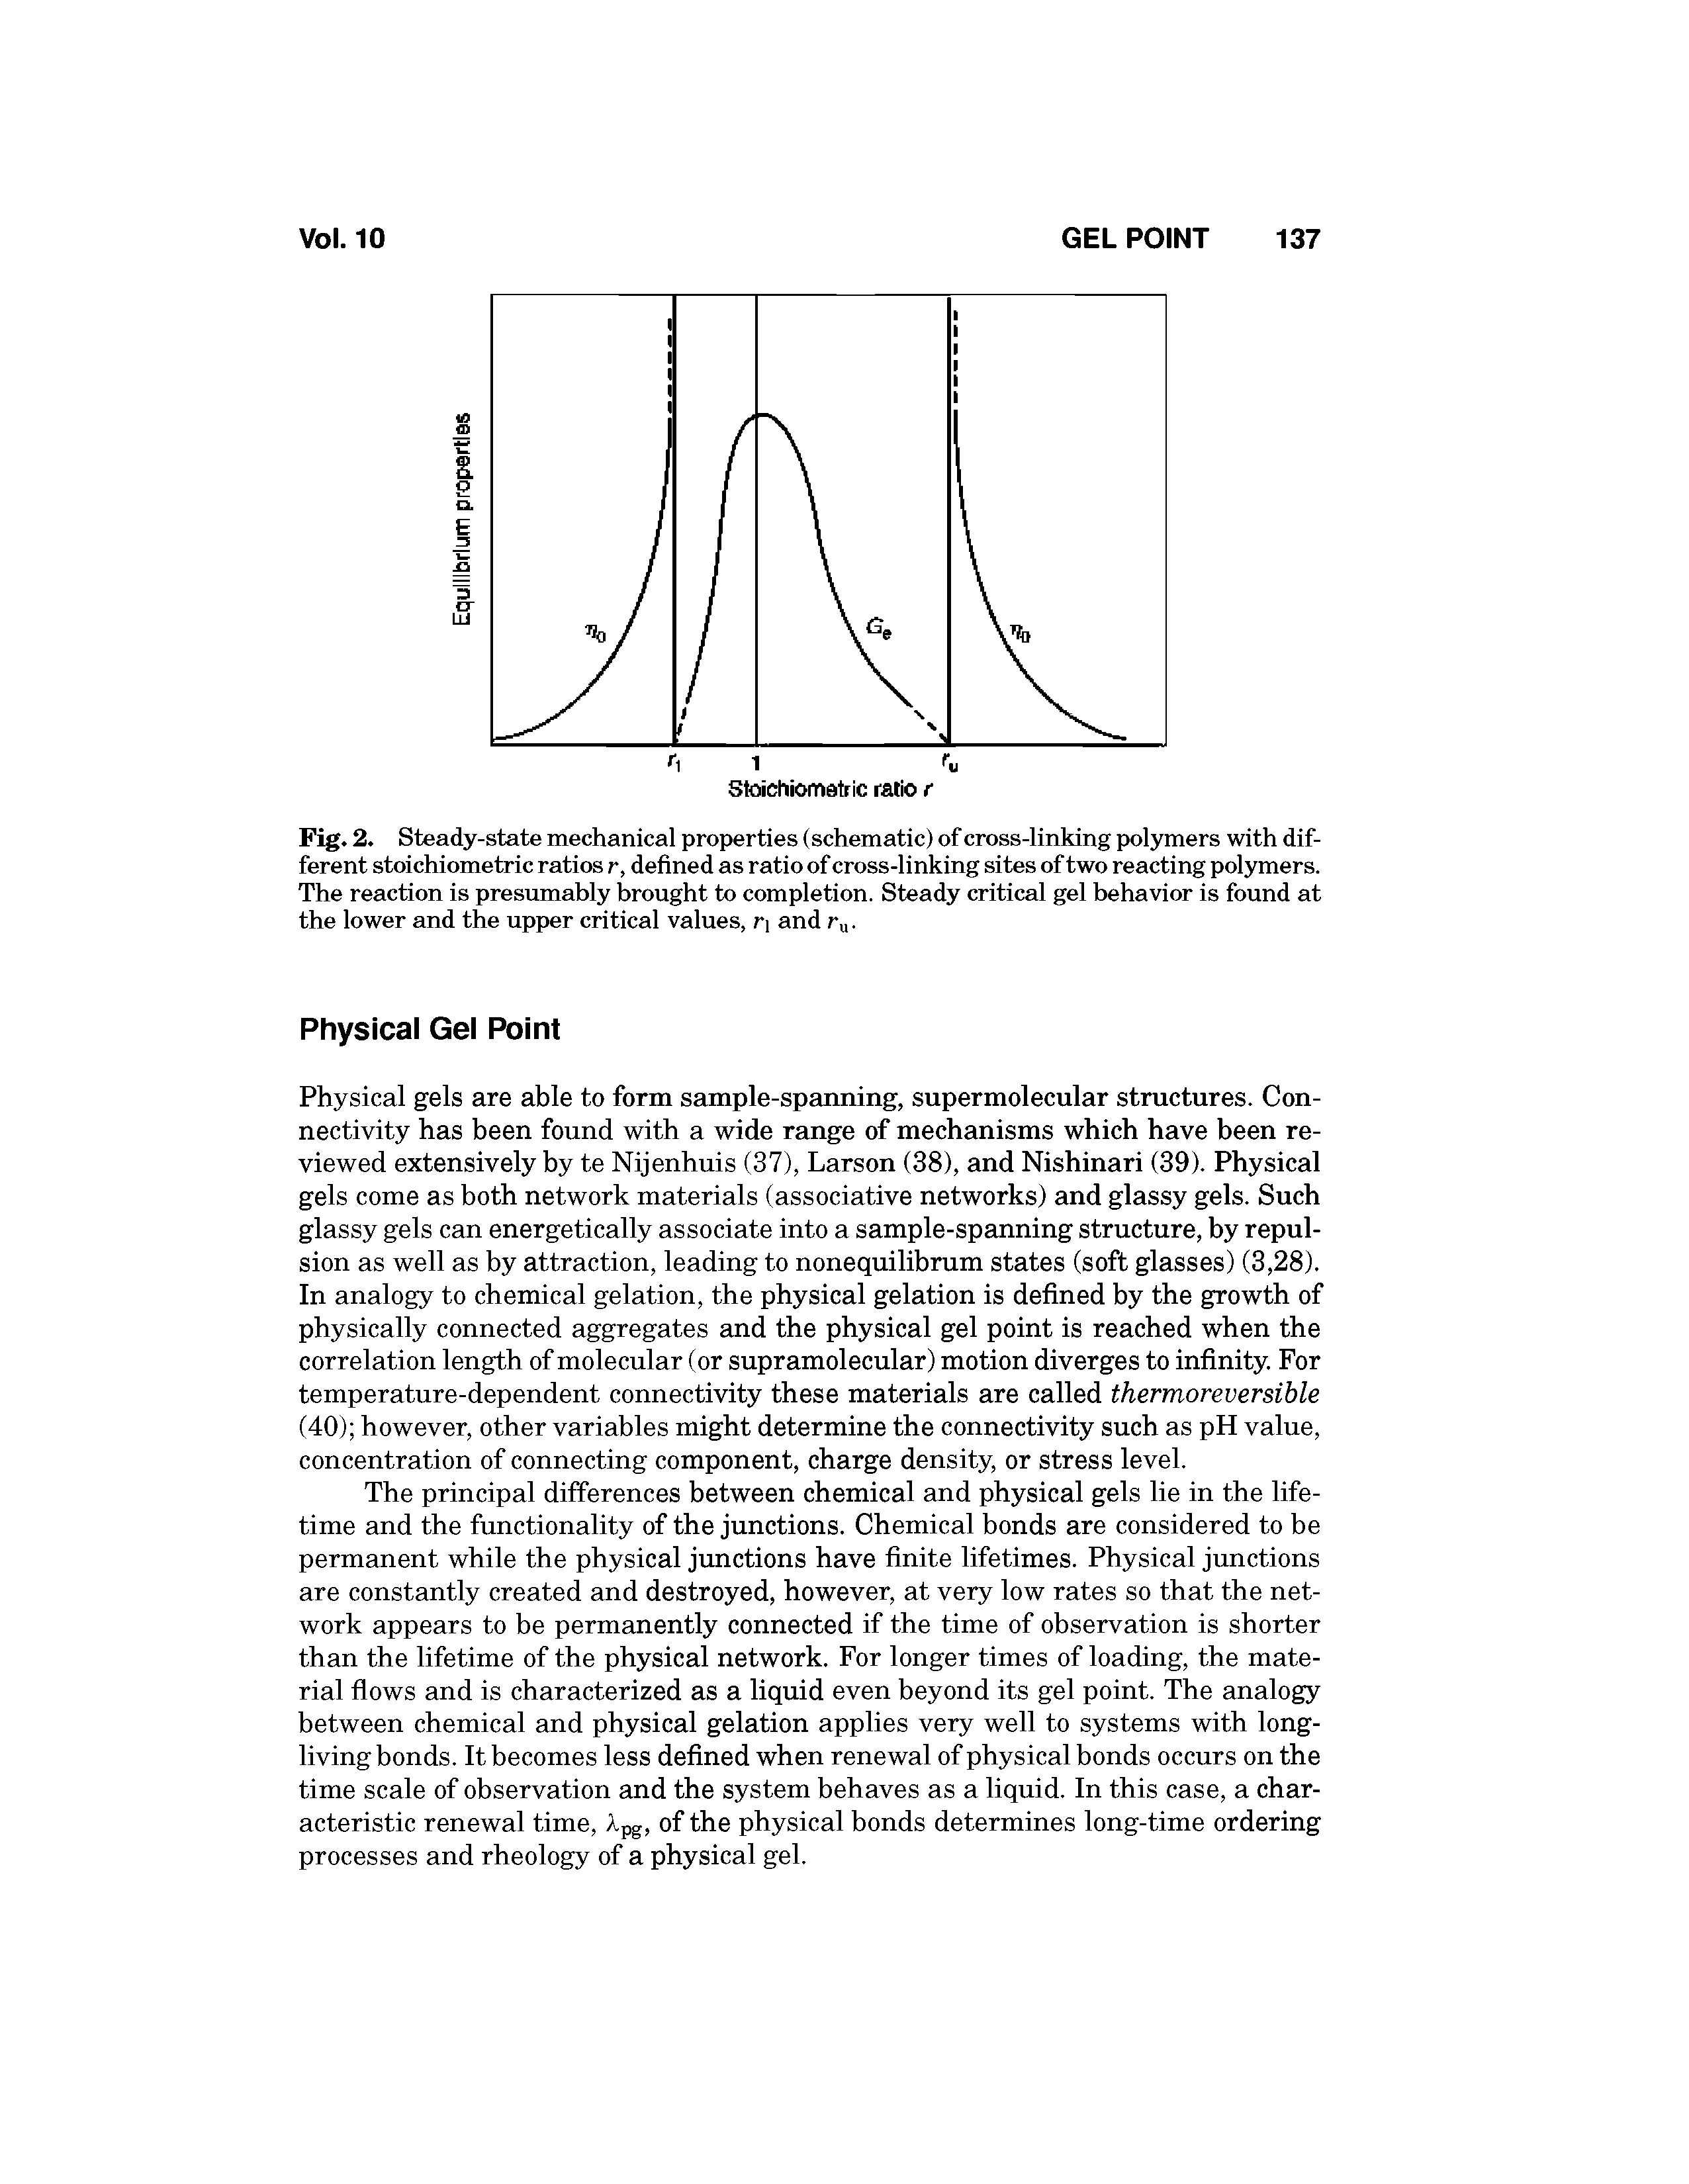 Fig. 2. Steady-state mechanical properties (schematic) of cross-linking polymers with different stoichiometric ratios r, defined as ratio of cross-linking sites of two reacting polymers. The reaction is presumably brought to completion. Steady critical gel behavior is found at the lower and the upper critical values, n and r .